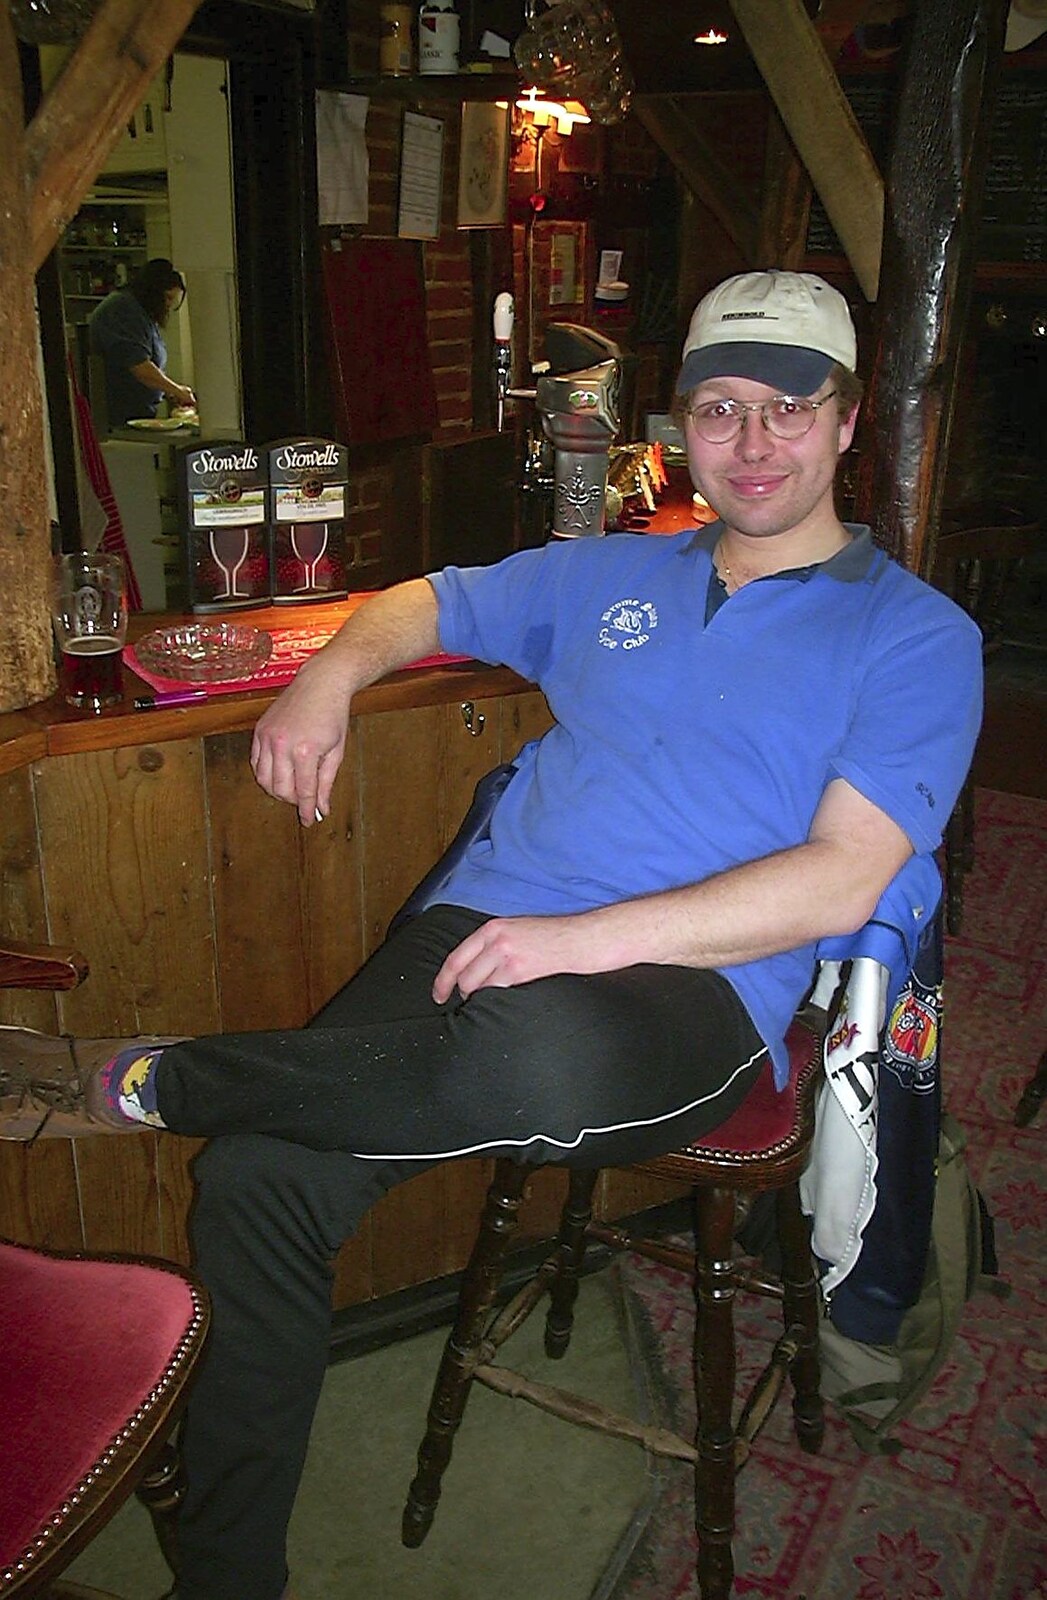 Marc at the bar from The BSCC Easter Bike Ride, Thelnetham and Redgrave, Suffolk - 10th April 2004